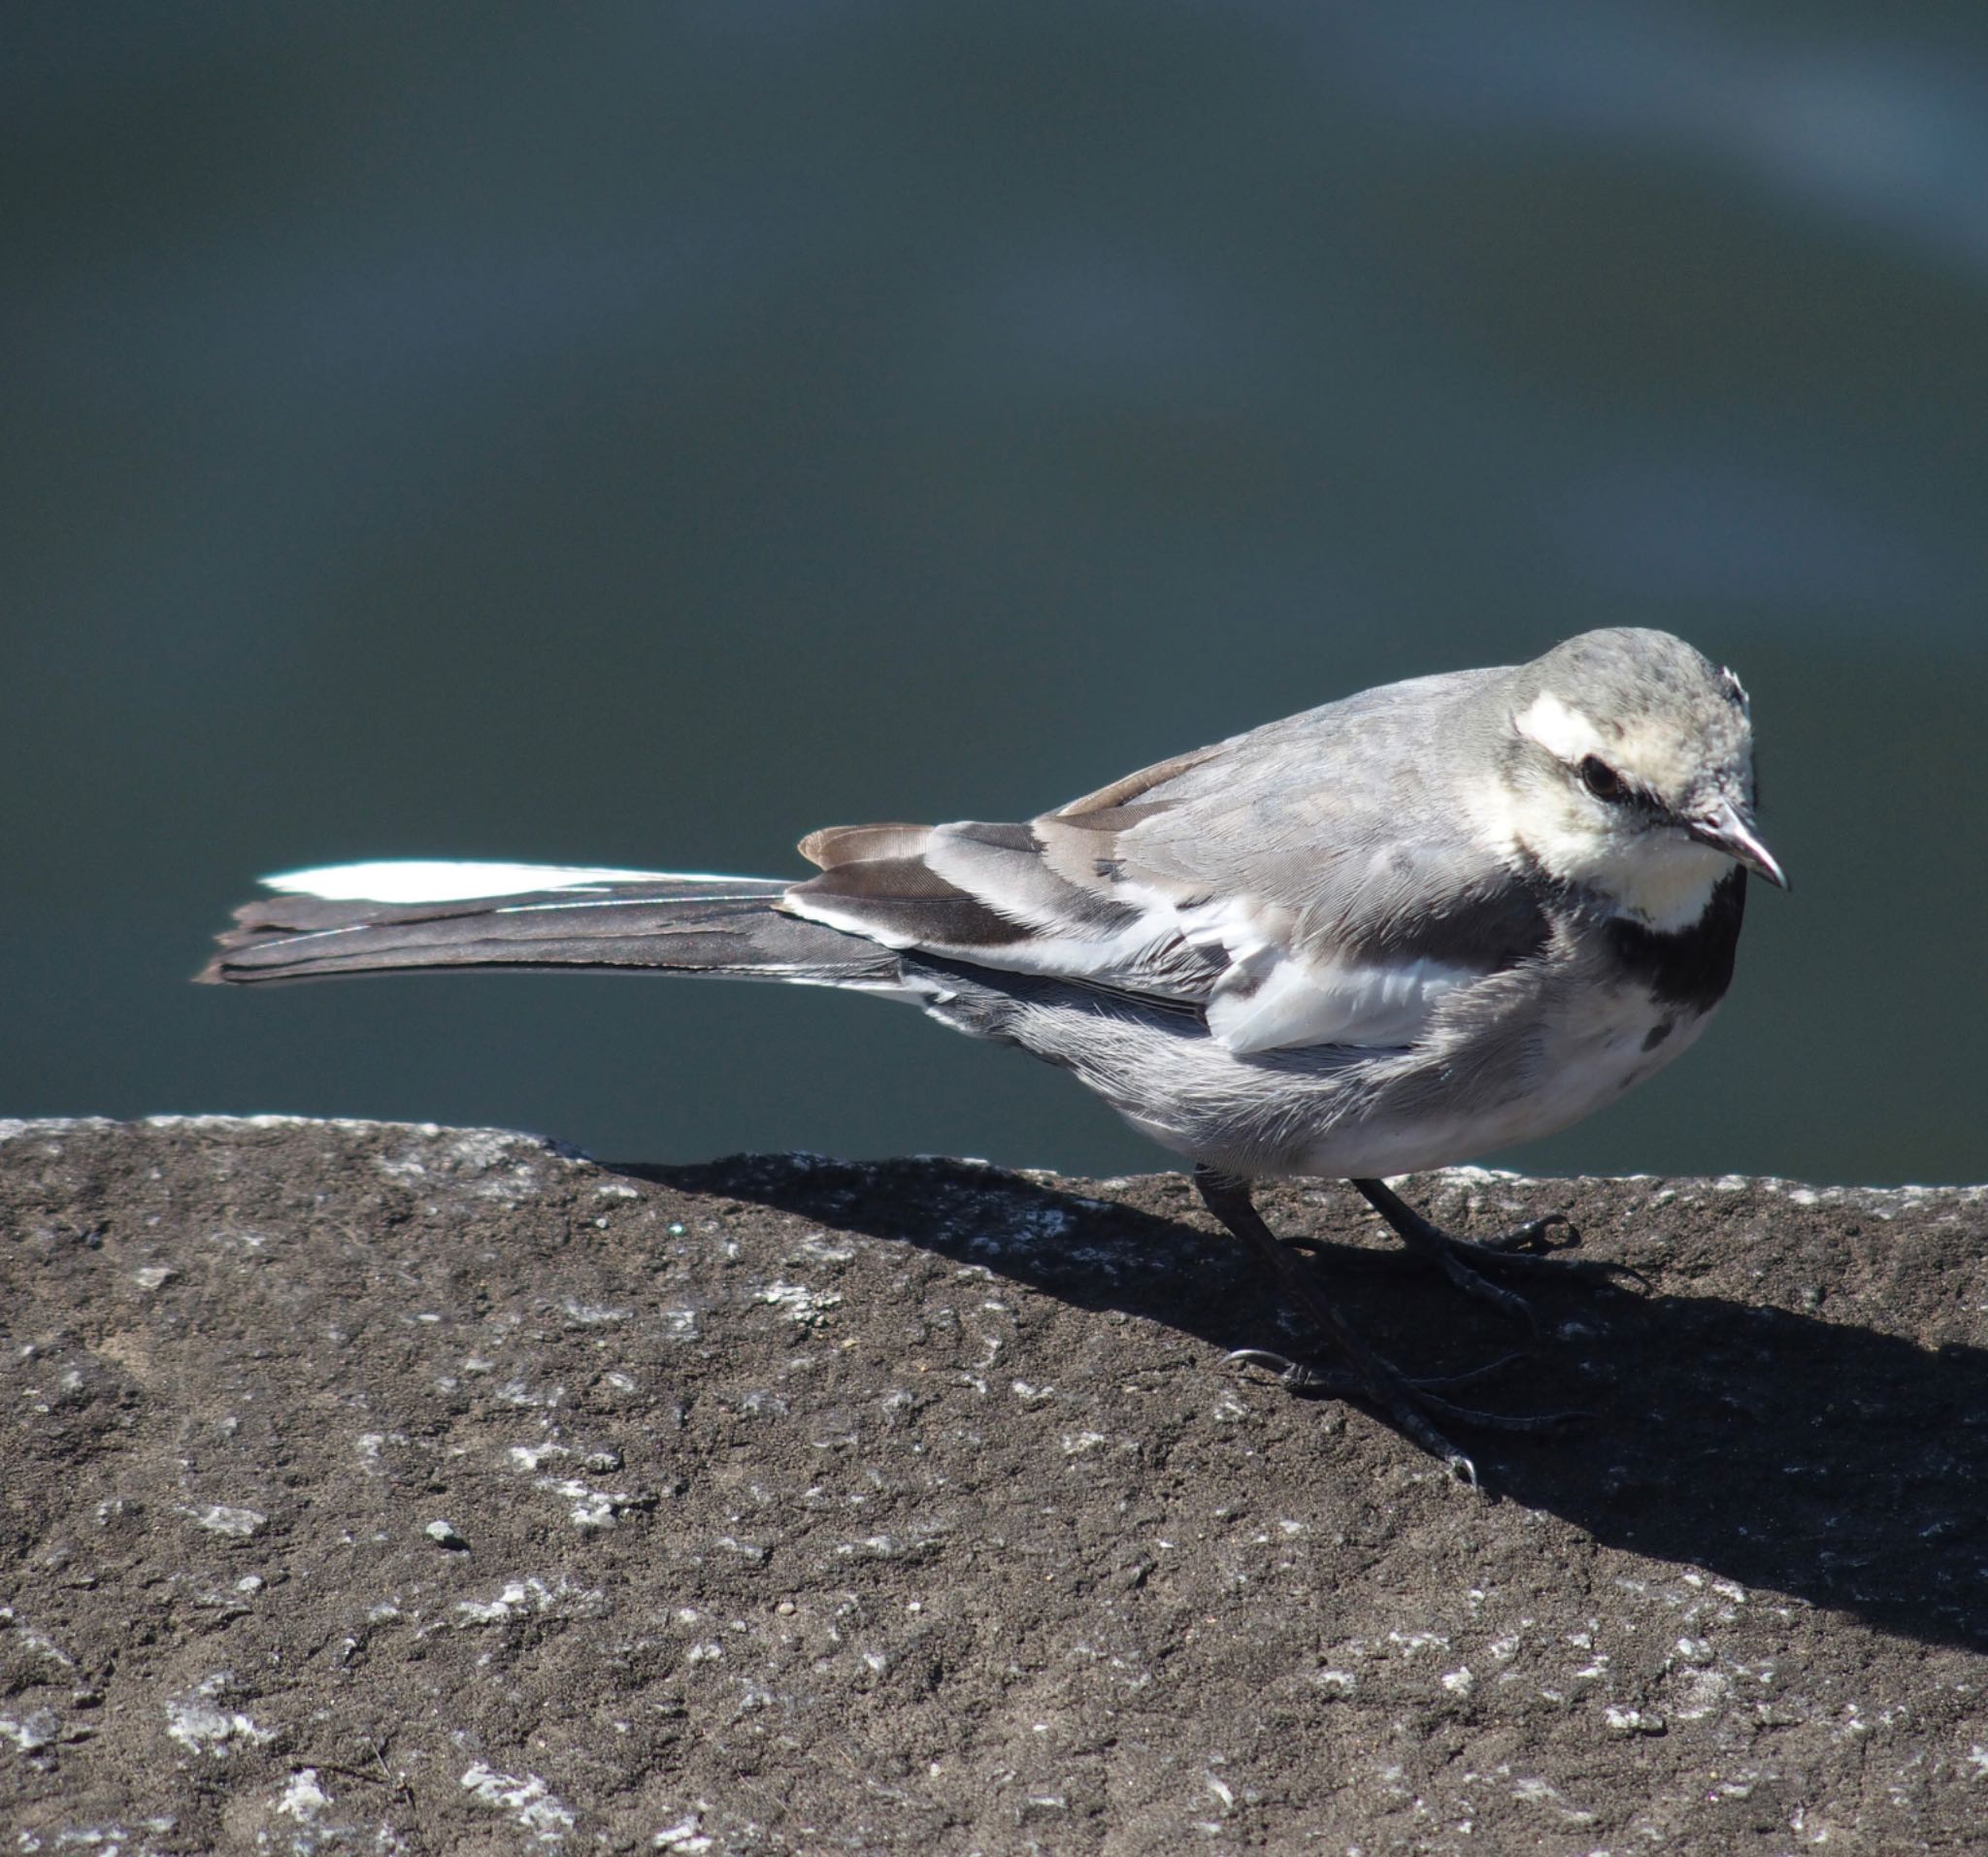 Photo of White Wagtail(ocularis) at Imperial Palace by うきぴ